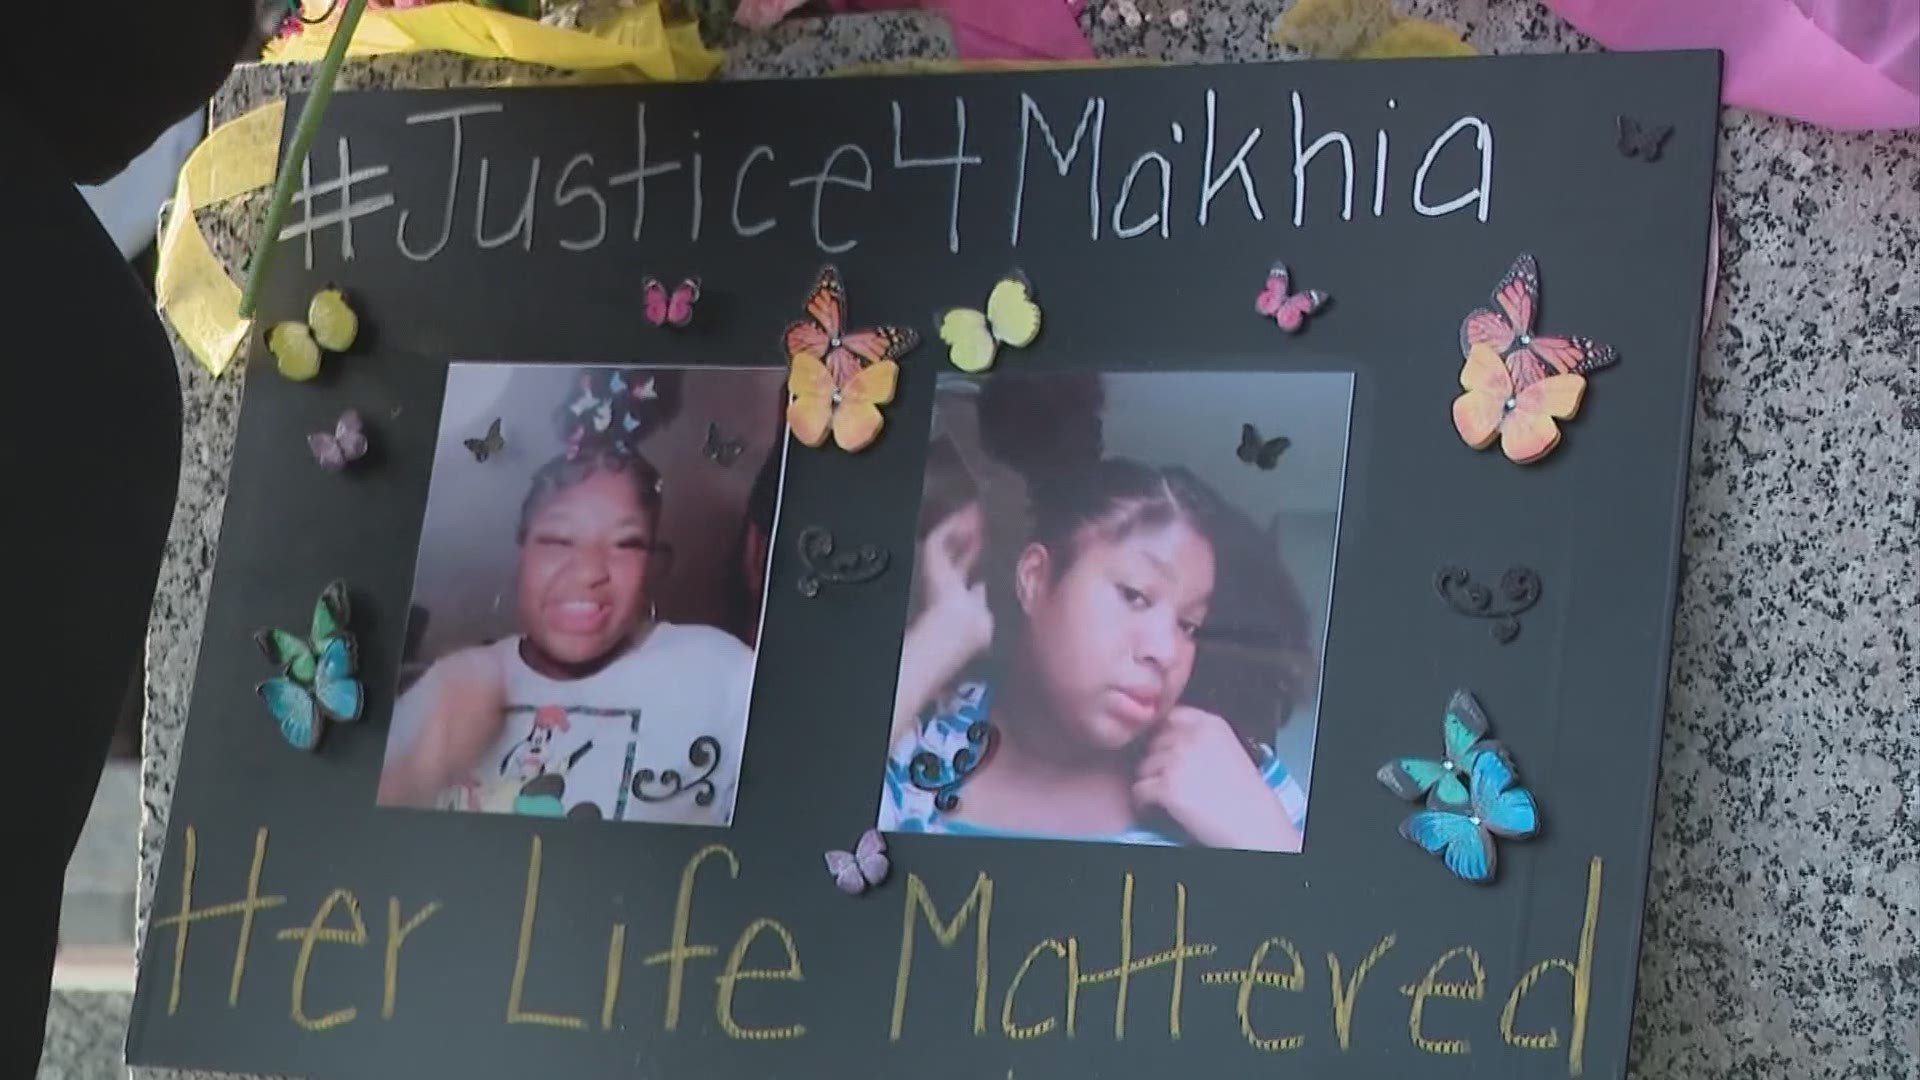 A group was at Columbus City Hall Friday night for a memorial gathering for Ma'Khia Bryant.